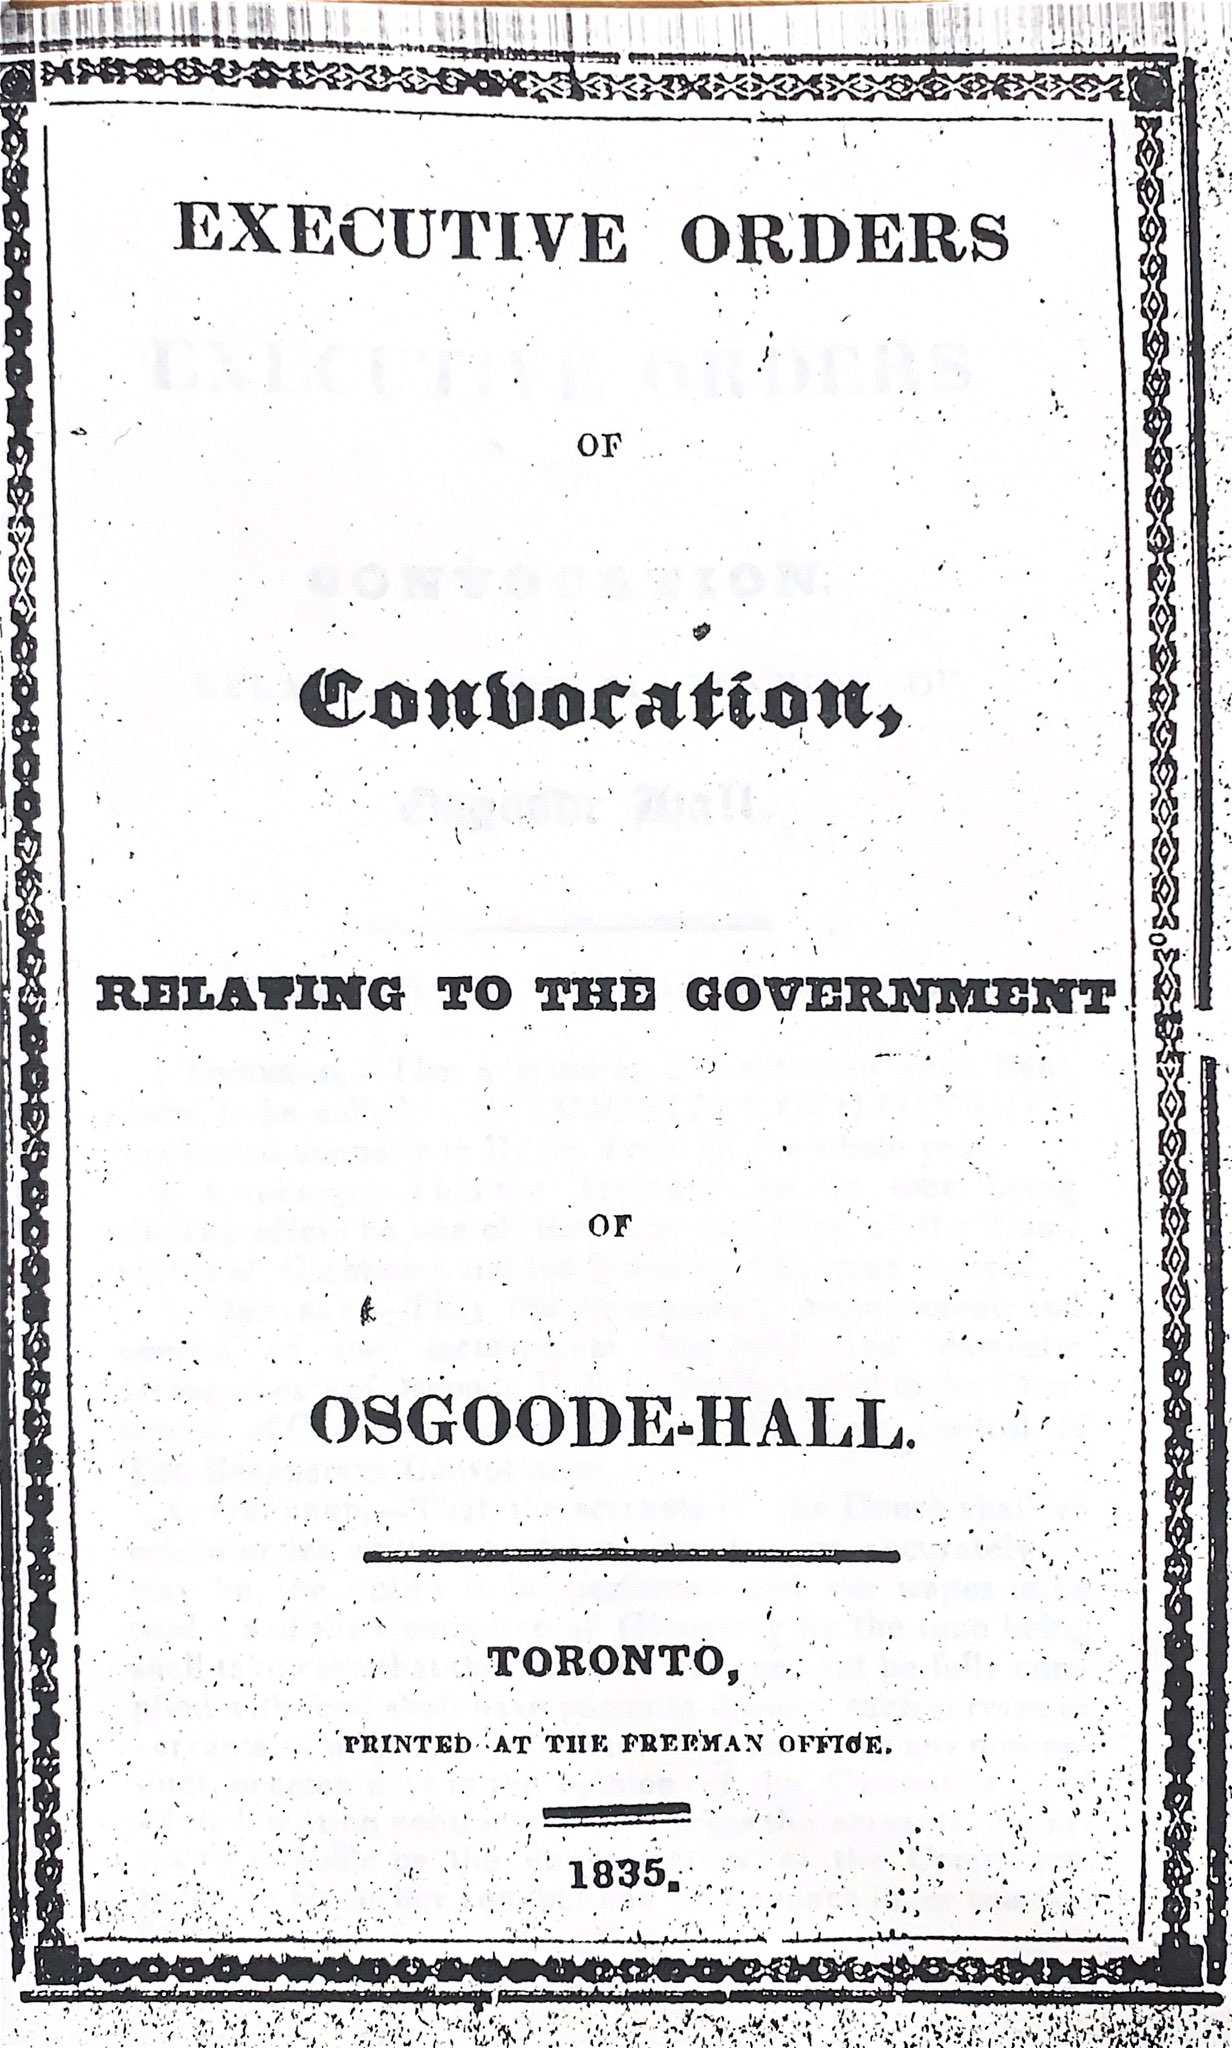 Executive orders of Convocation, 1833 (printed 1835)